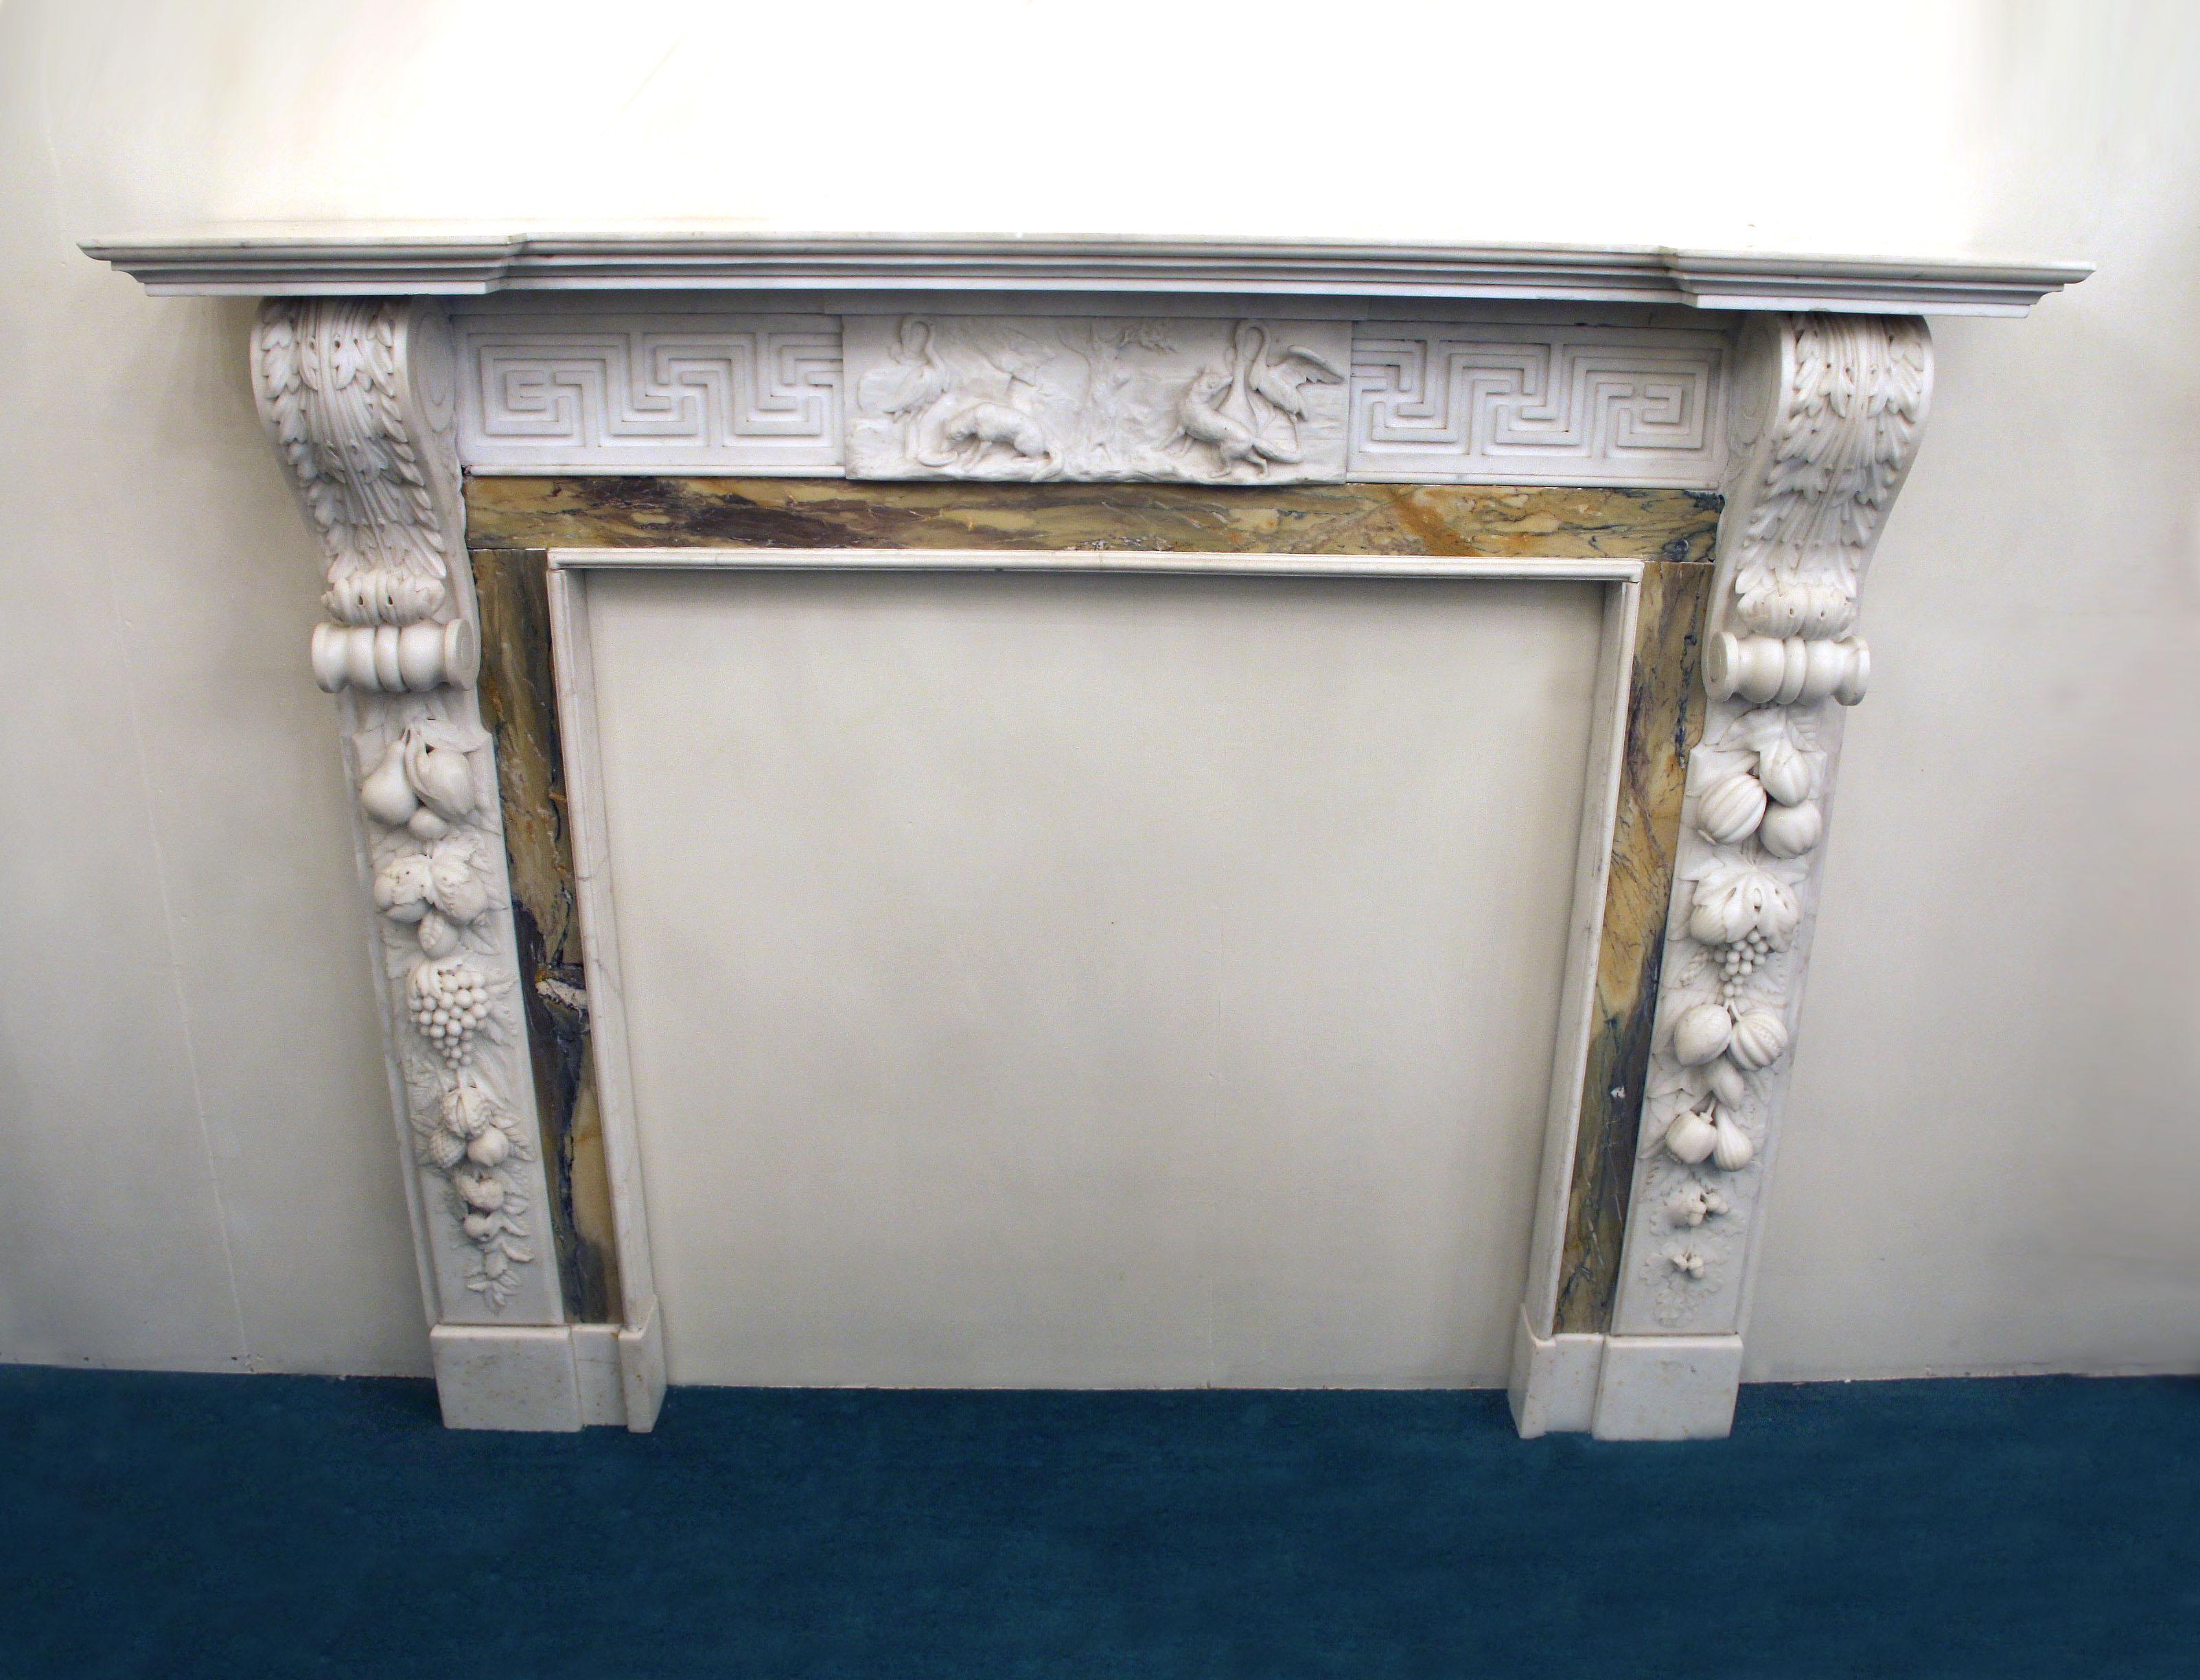 Late 19th century fine George II Sienna and White Statuary Marble Fireplace Surround In the Manner of Sir Henry Cheere

In the Manner of Sir Henry Cheere

Formerly in the Collection of Mr. and Mrs. Saul Steinberg.

Sir Henry Cheere was a noted